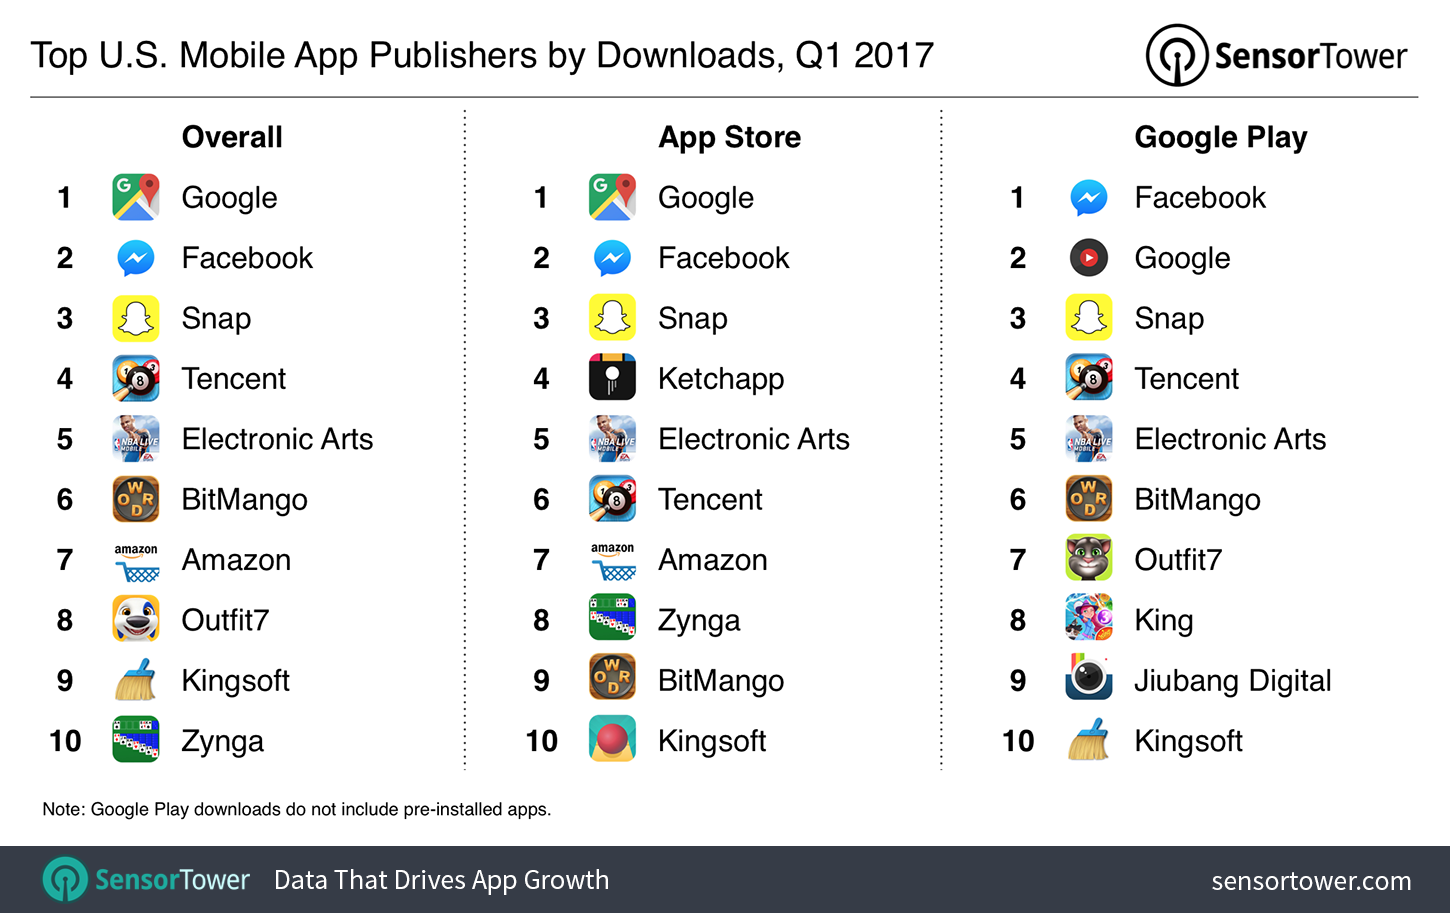 Q1 2017's Top Mobile App Publishers by U.S. Downloads